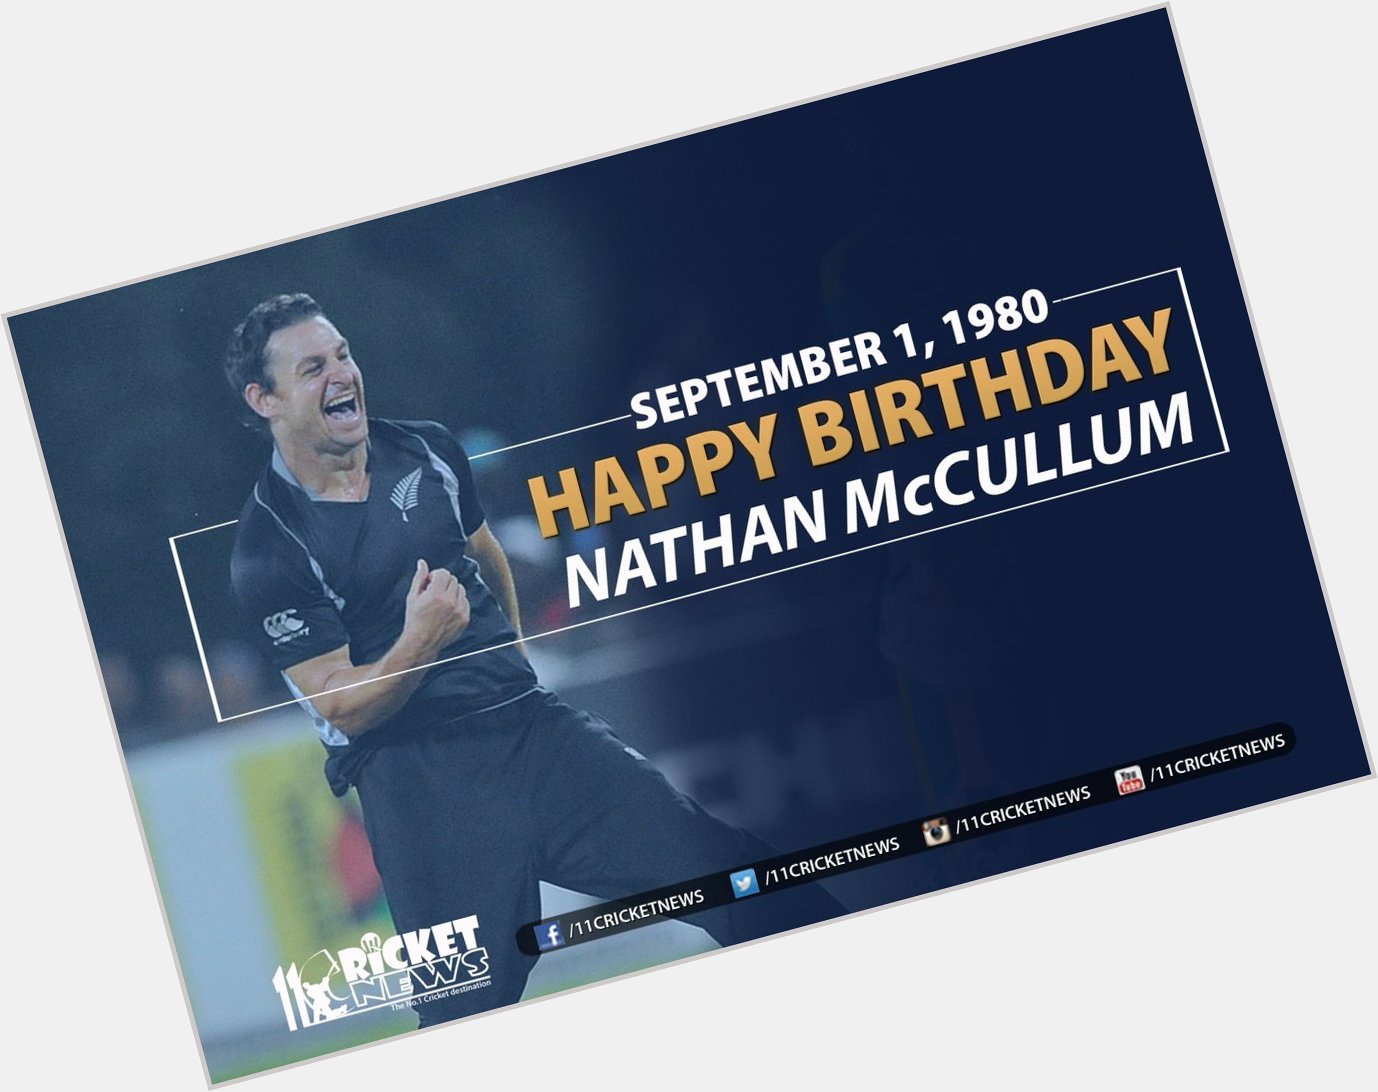 Happy Birthday \" Nathan McCullum\". He turns 37 today 